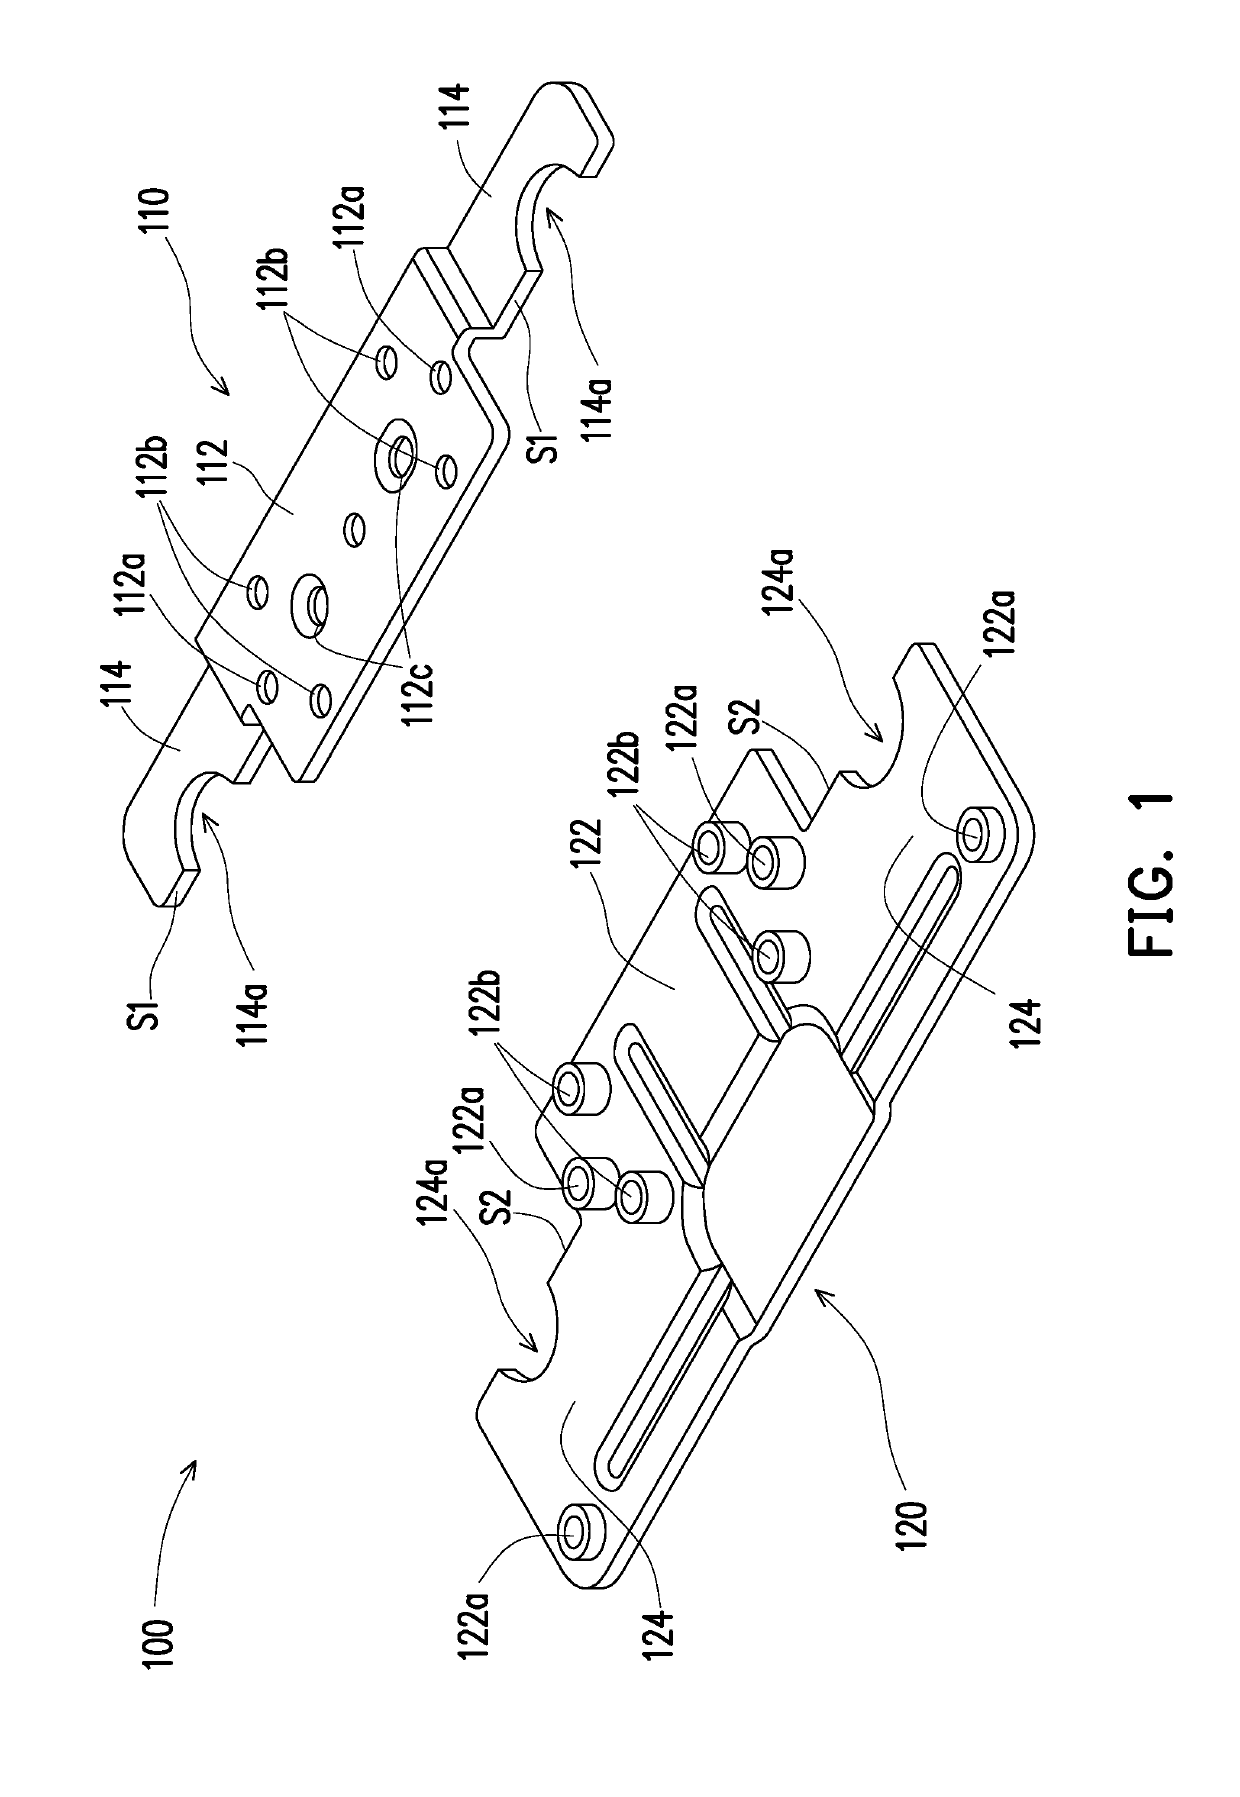 Installing bracket and electronic device assembly